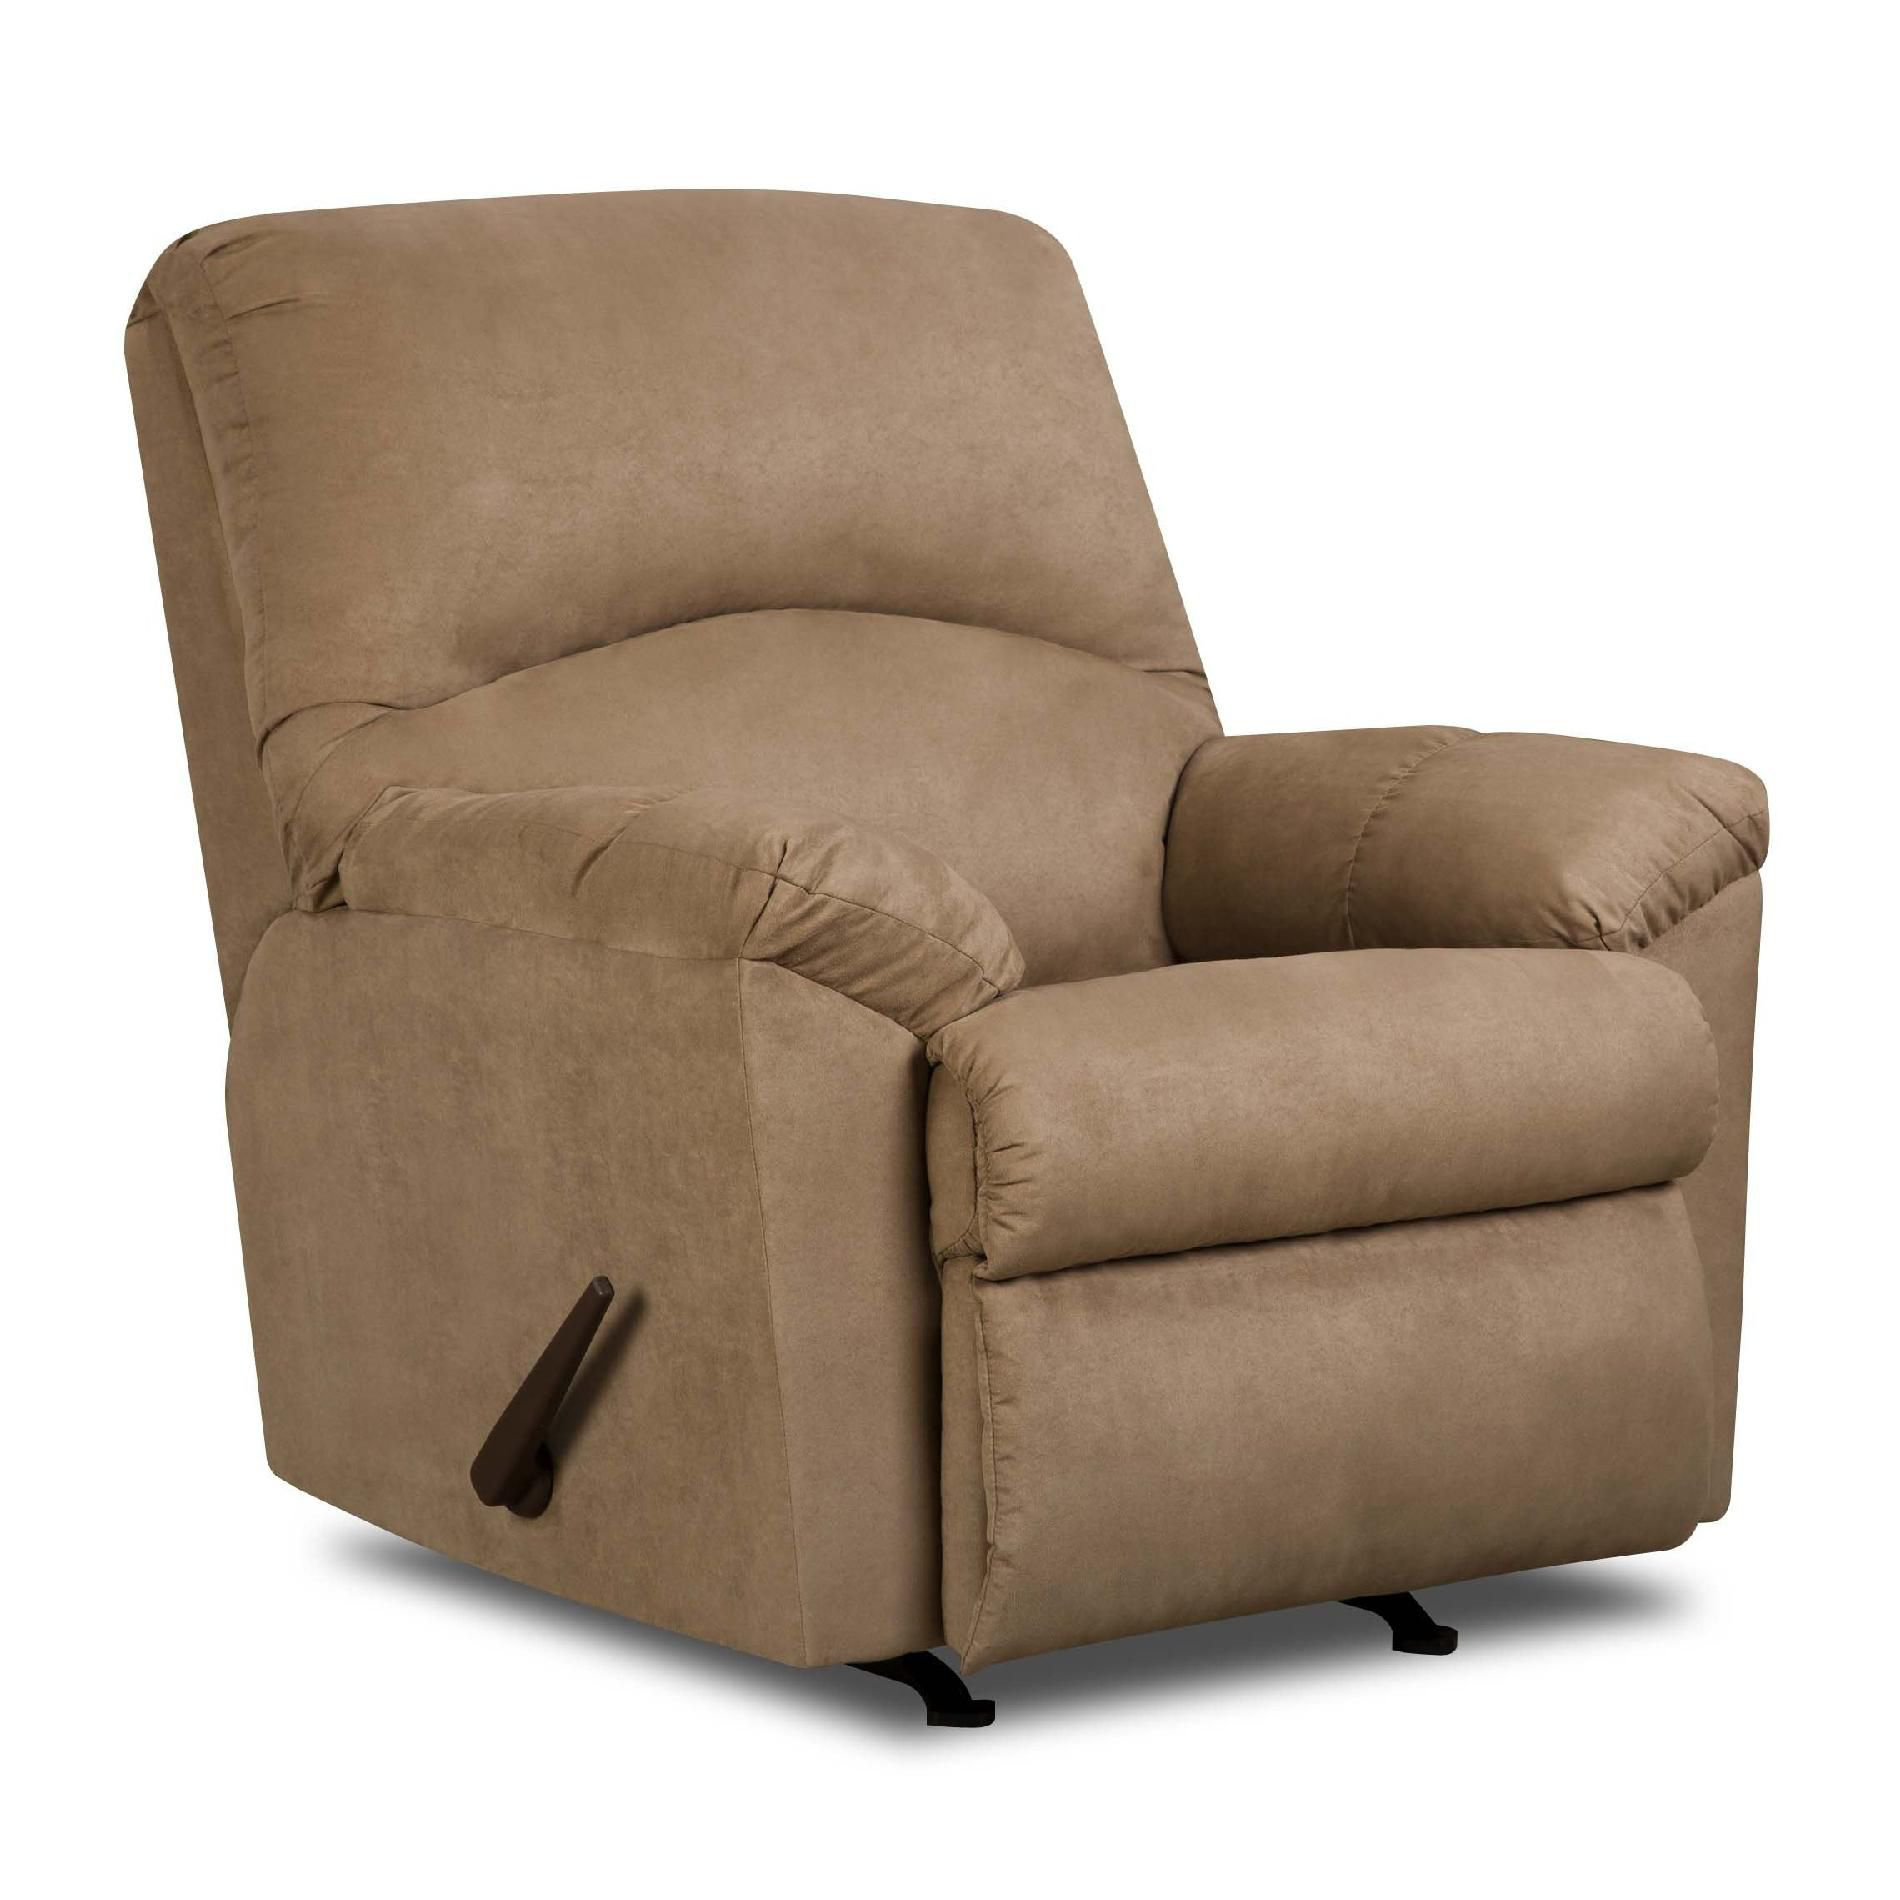 Simmons Upholstery Tan Microfiber, Simmons Leather Recliner